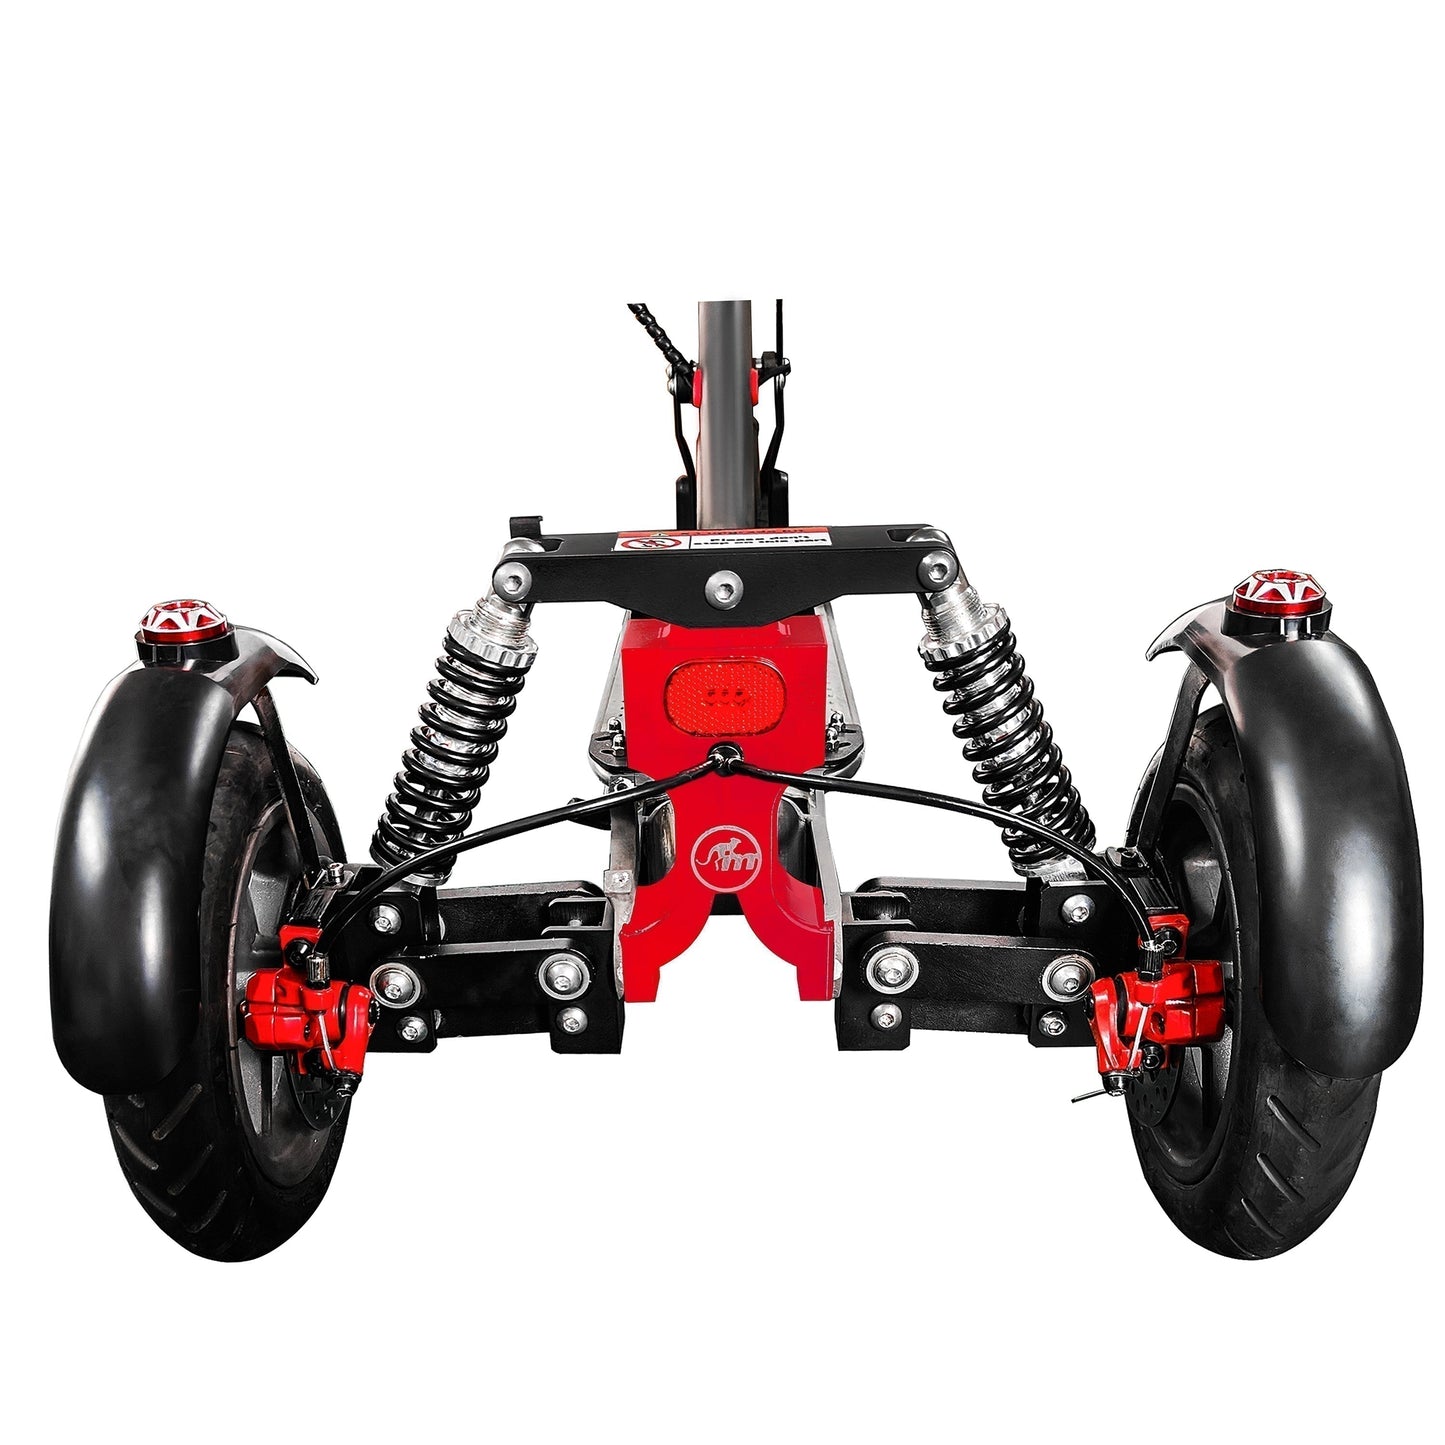 Monorim X3 upgrade kit to be Three wheels special for s9max frames